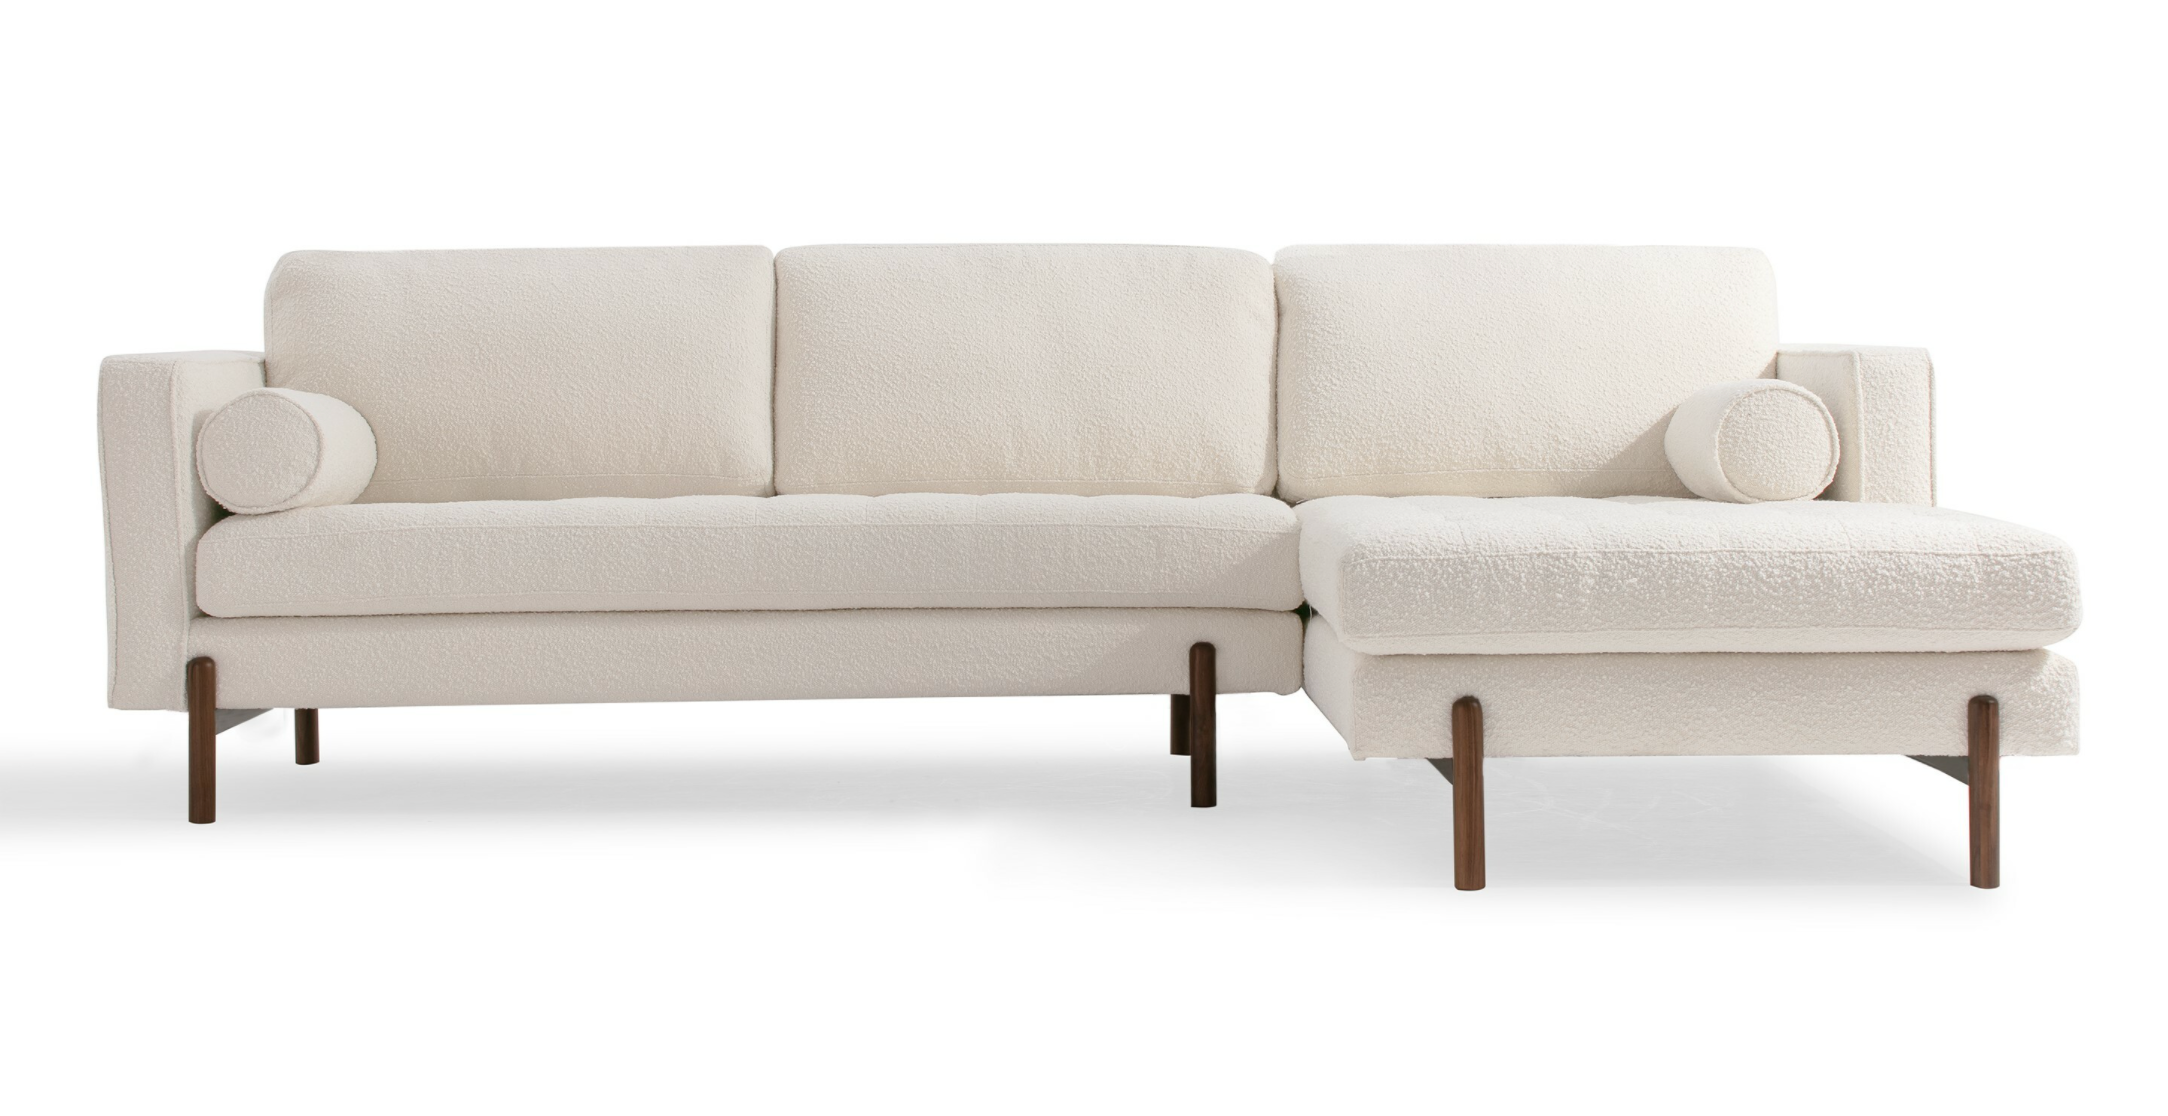 A Mad Men–Influenced Sectional, a Stool With Swag, and More Bouclé Must-Haves